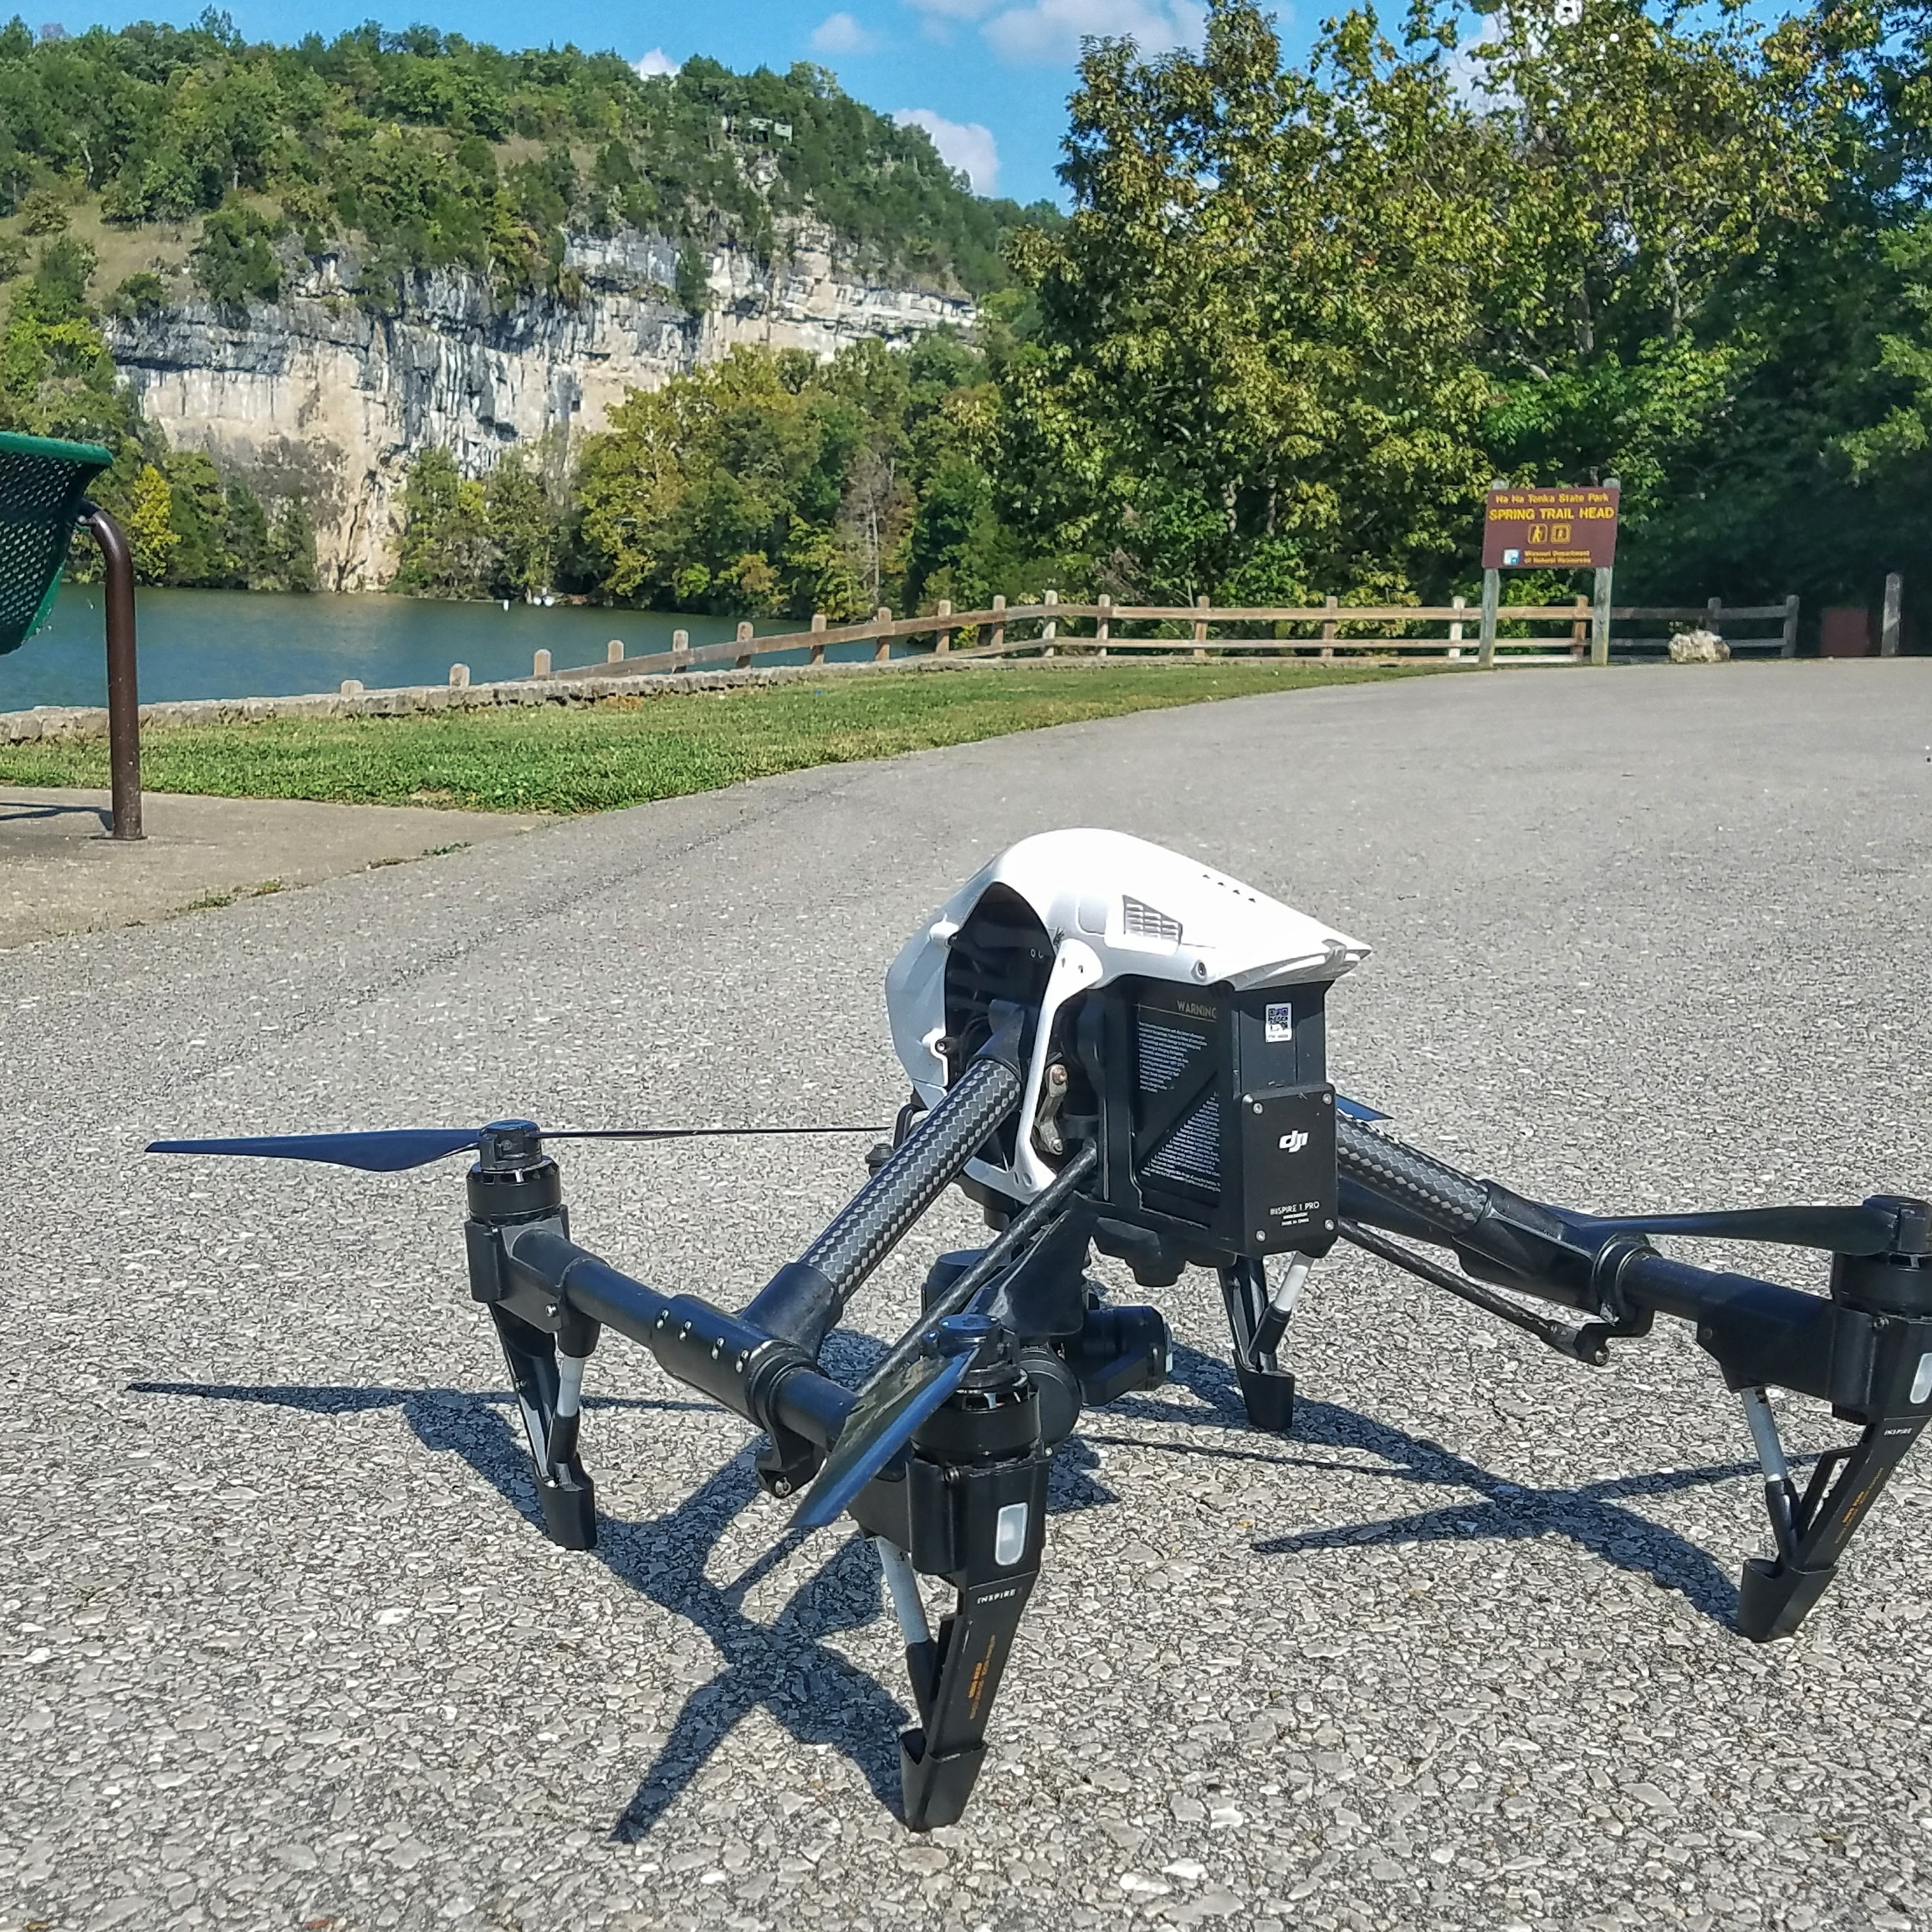 Drones are used frequently in the film industry